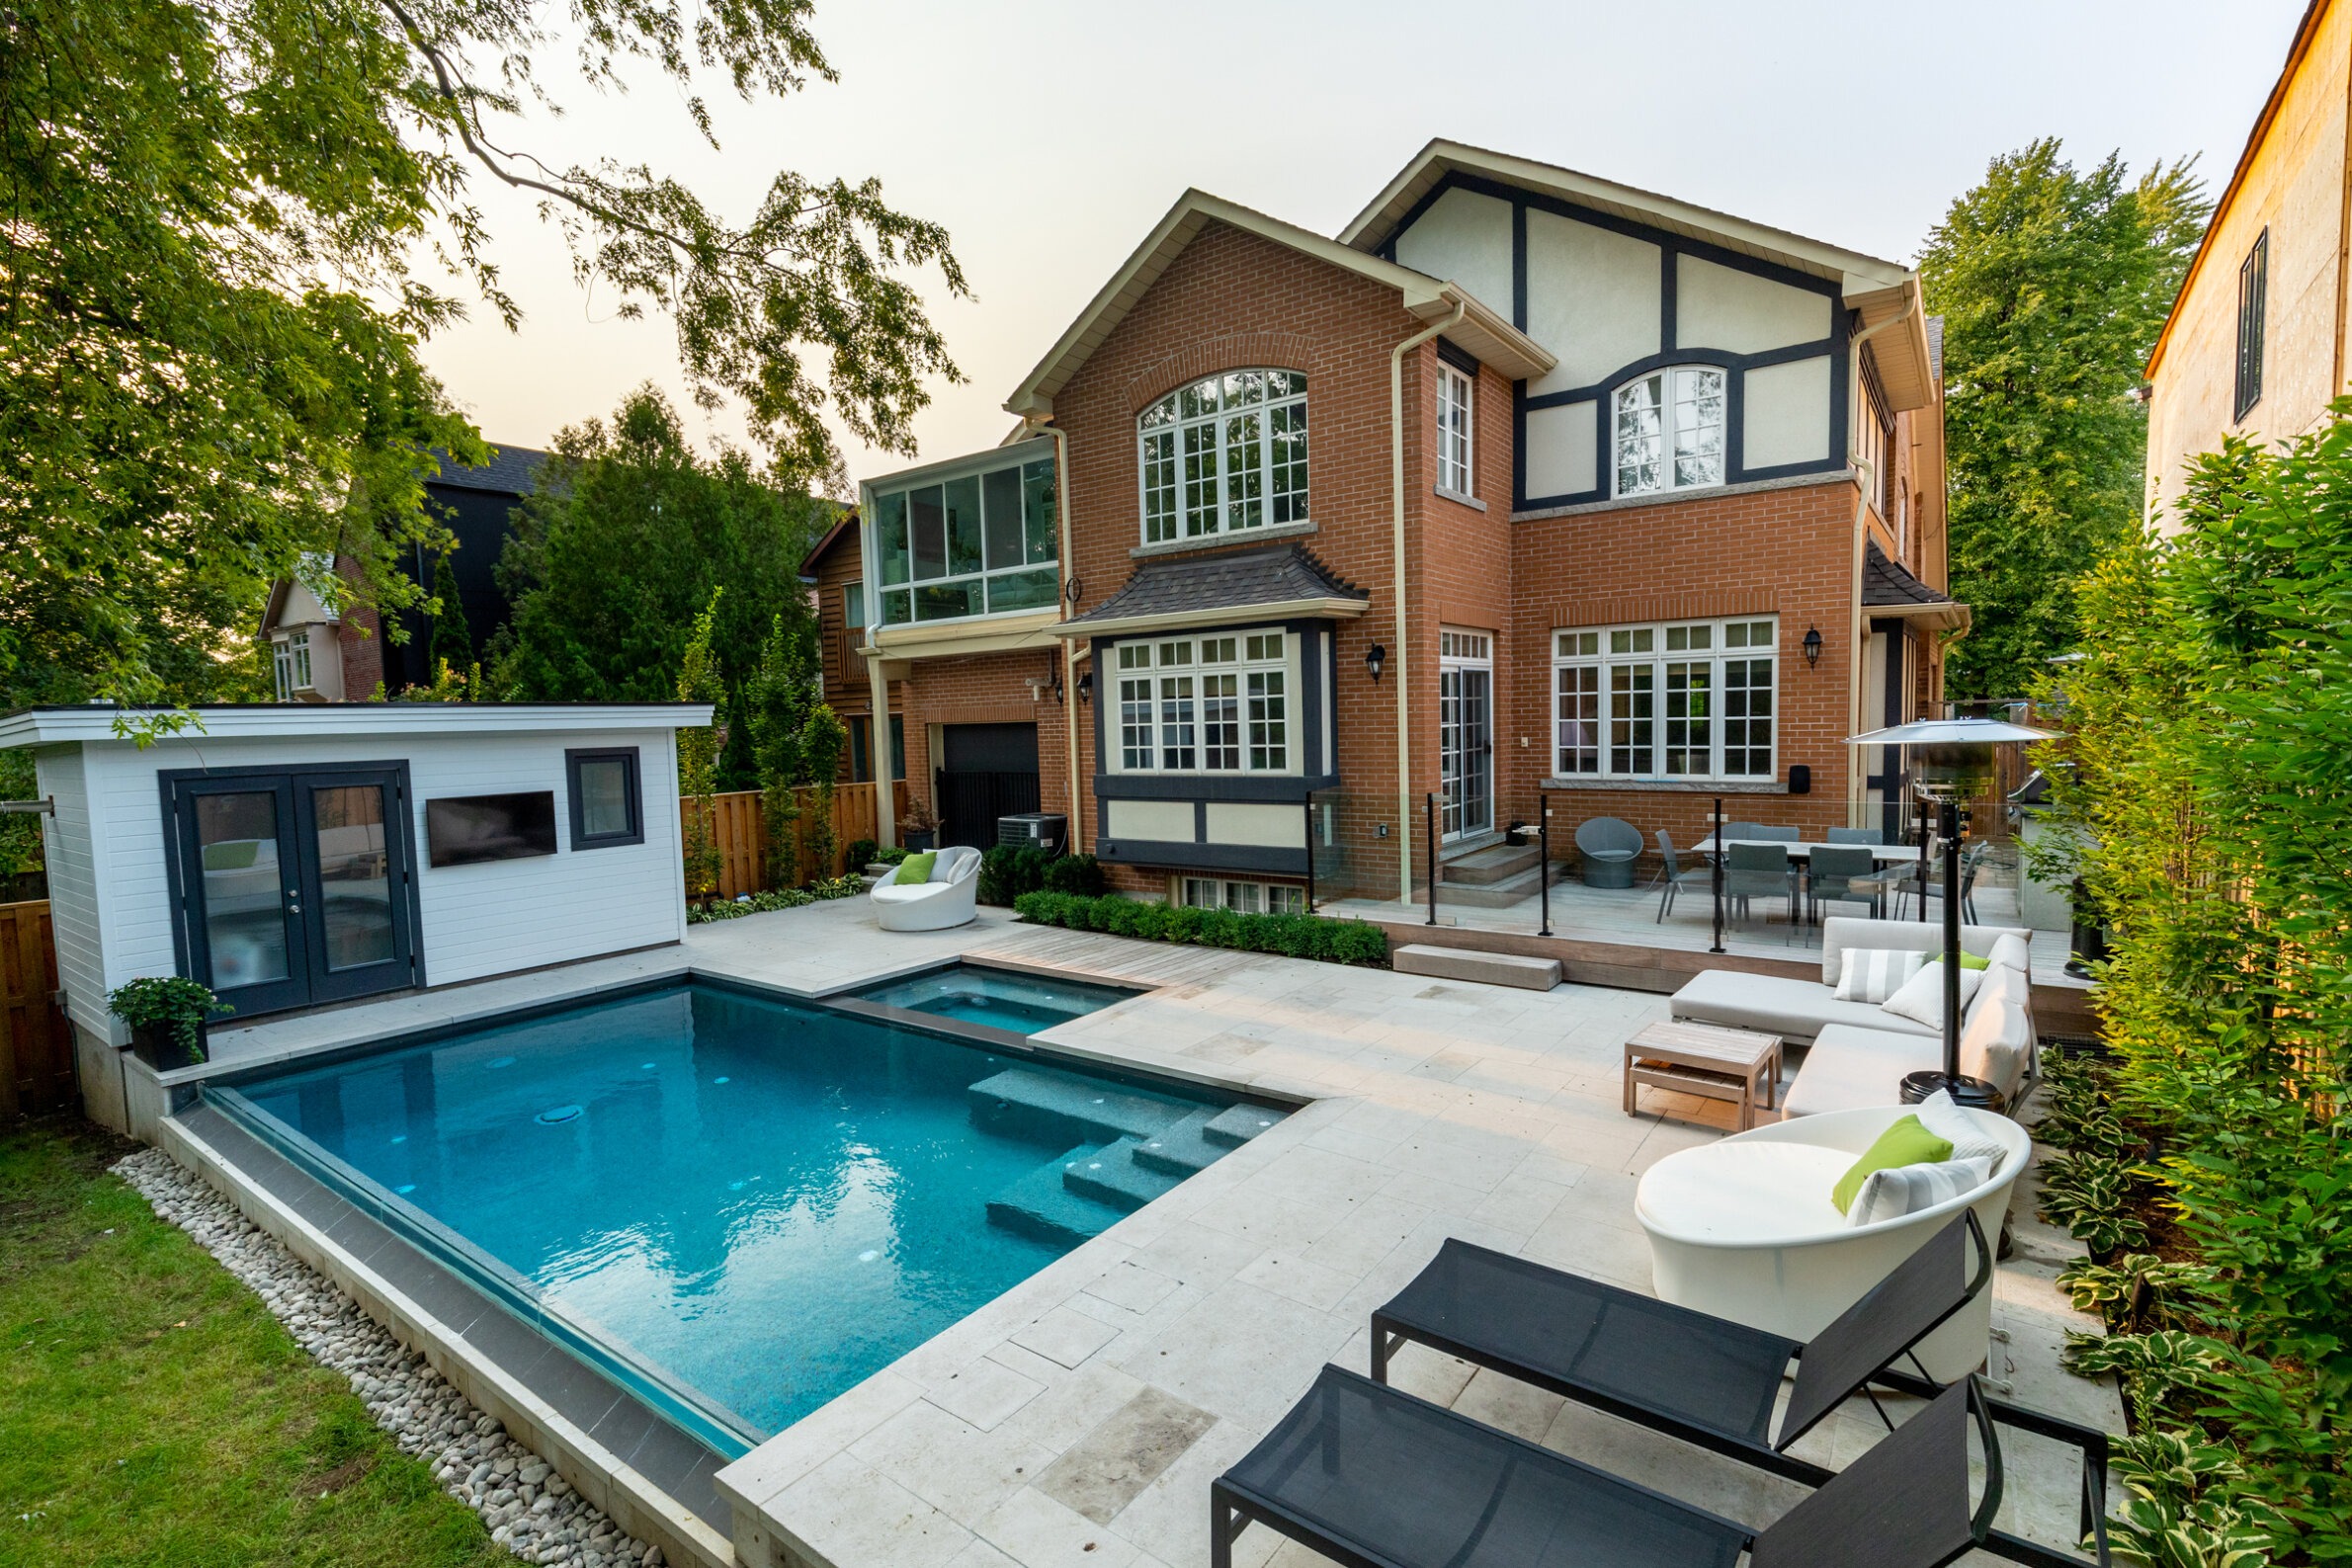 This image shows a luxurious backyard with a swimming pool, a small pool house, modern patio furniture, and a two-story brick house with large windows.